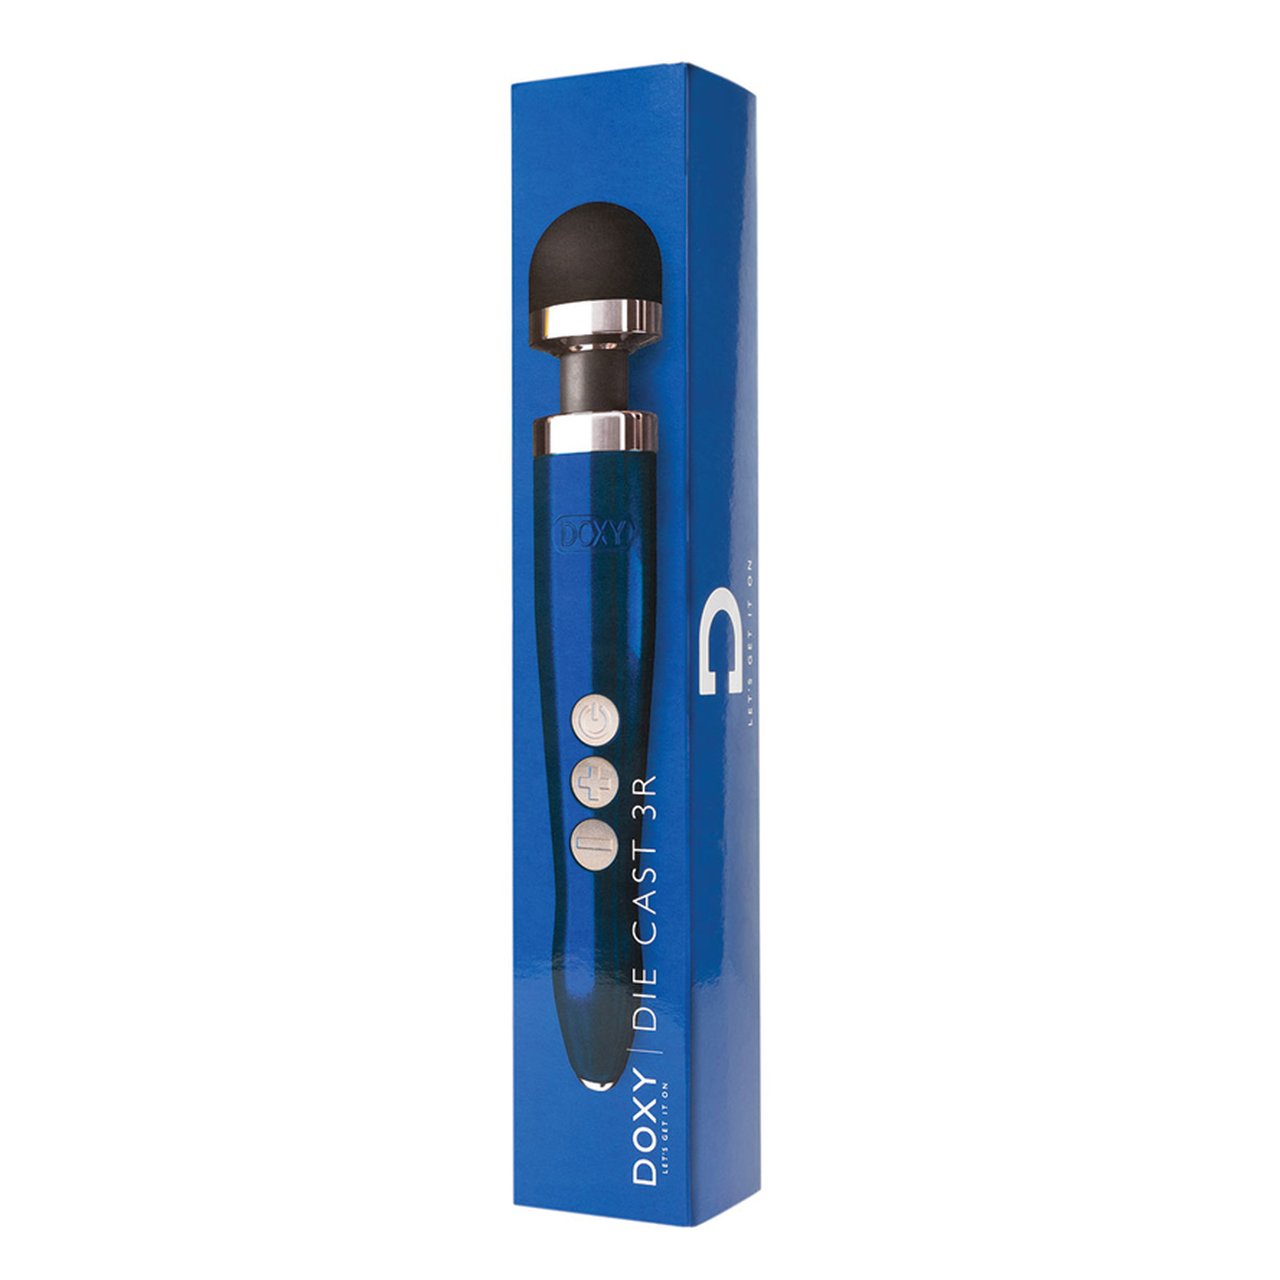 Doxy Die Cast 3R Blue Flame Rechargeable Vibrating Wand Massager with Screw-On Head